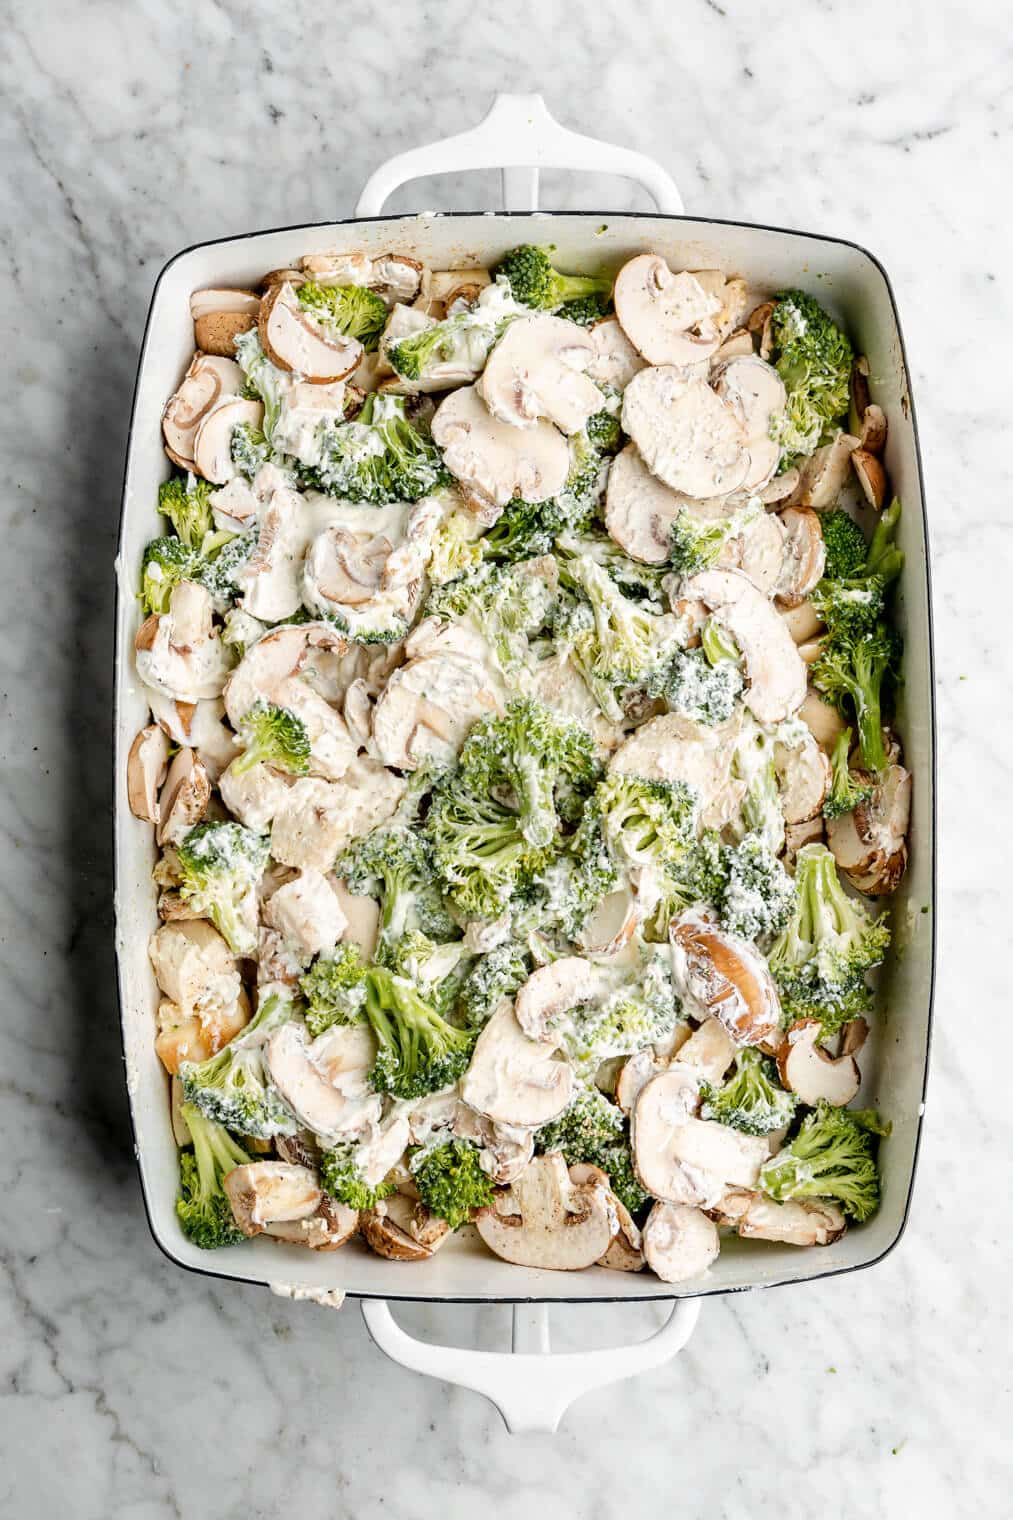 Mushrooms, broccoli, and chicken combined with sour cream in a casserole dish.